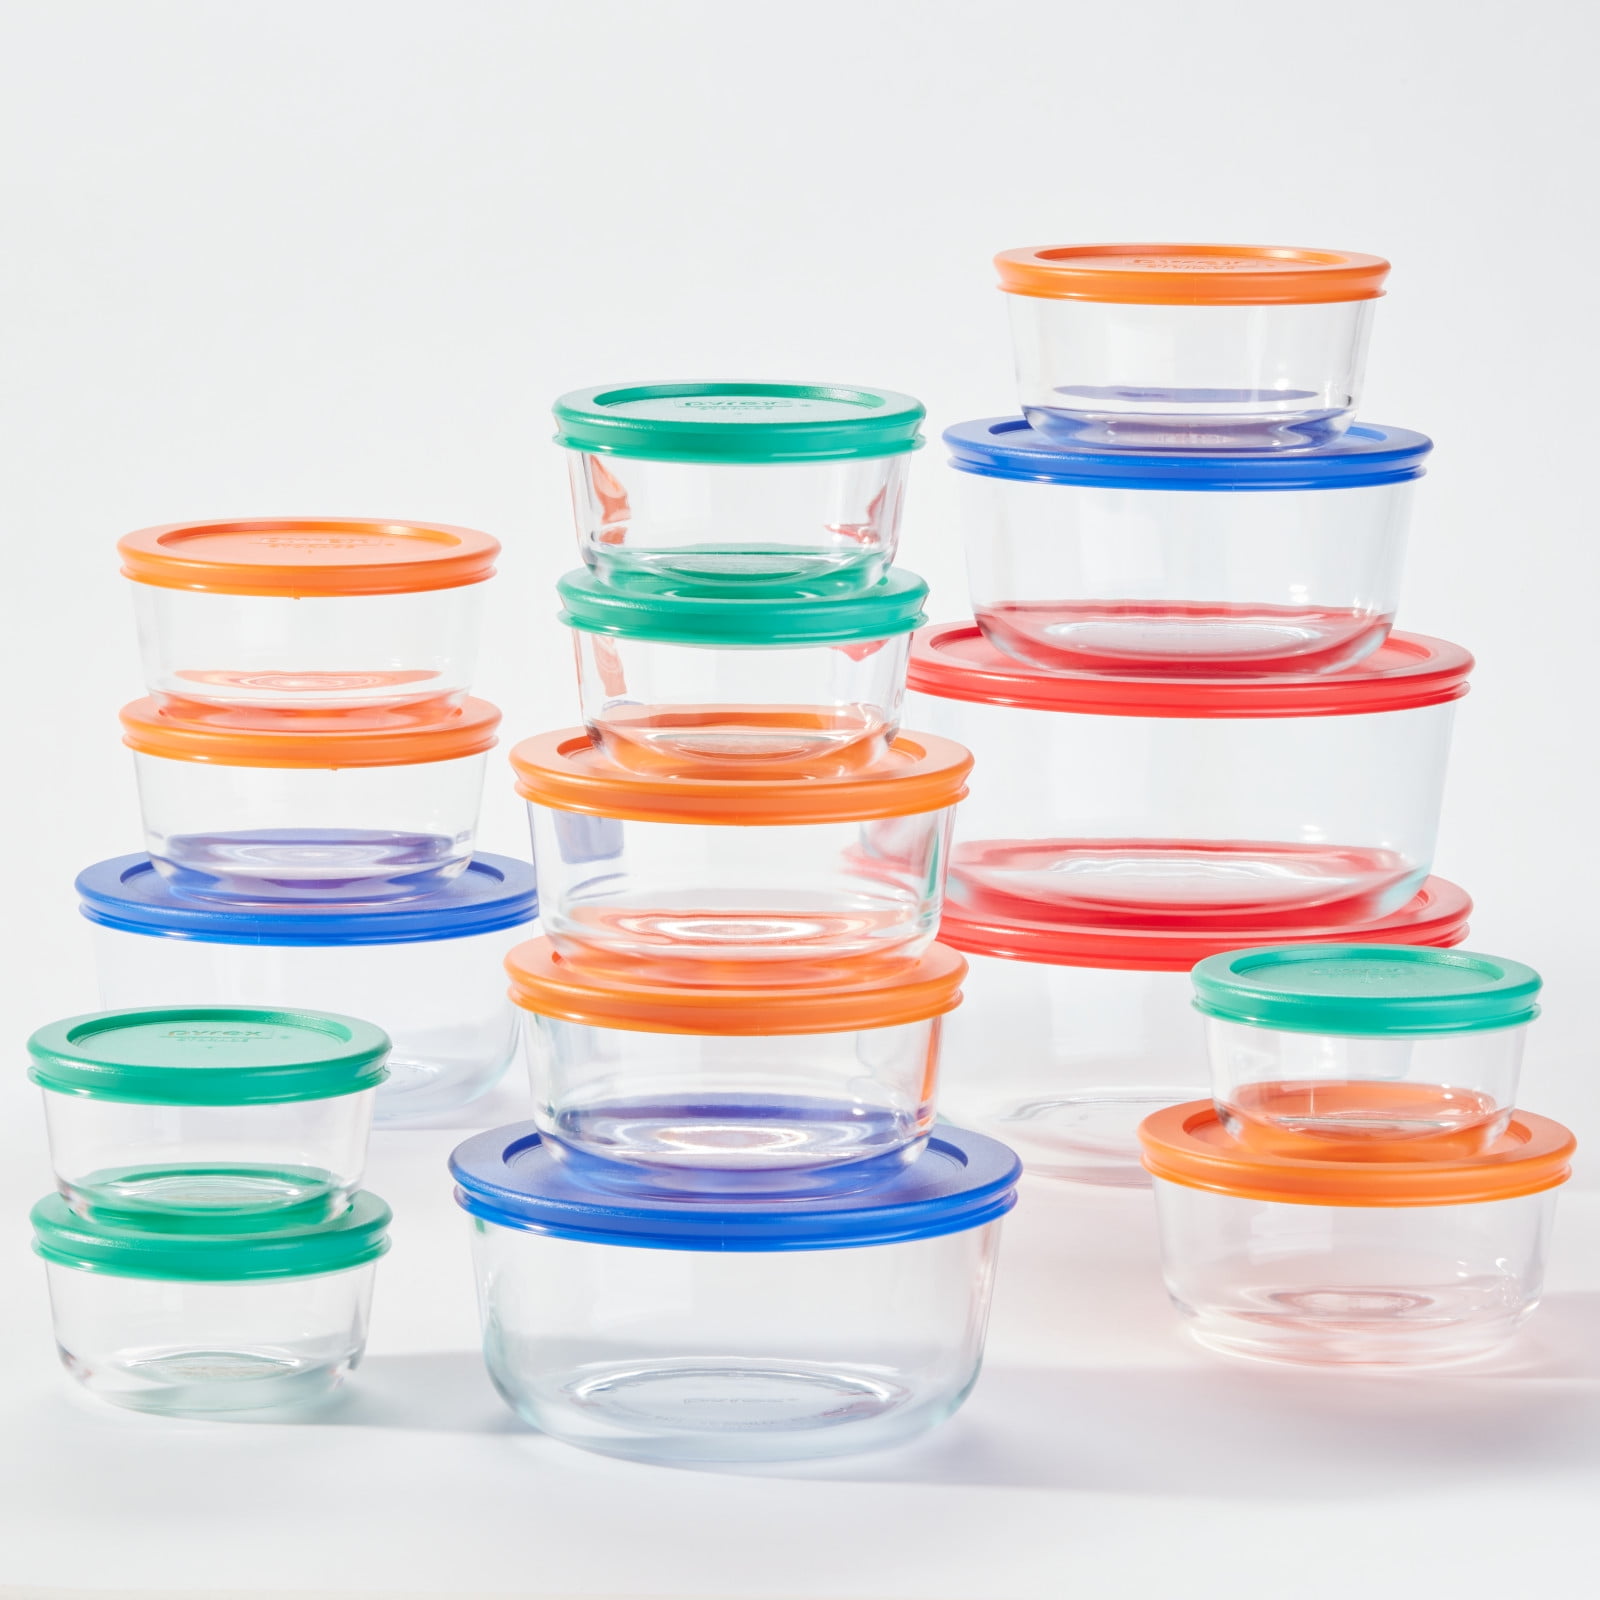 Pyrex Simply Store Grocery Bakeware, 5 ct - Baker's